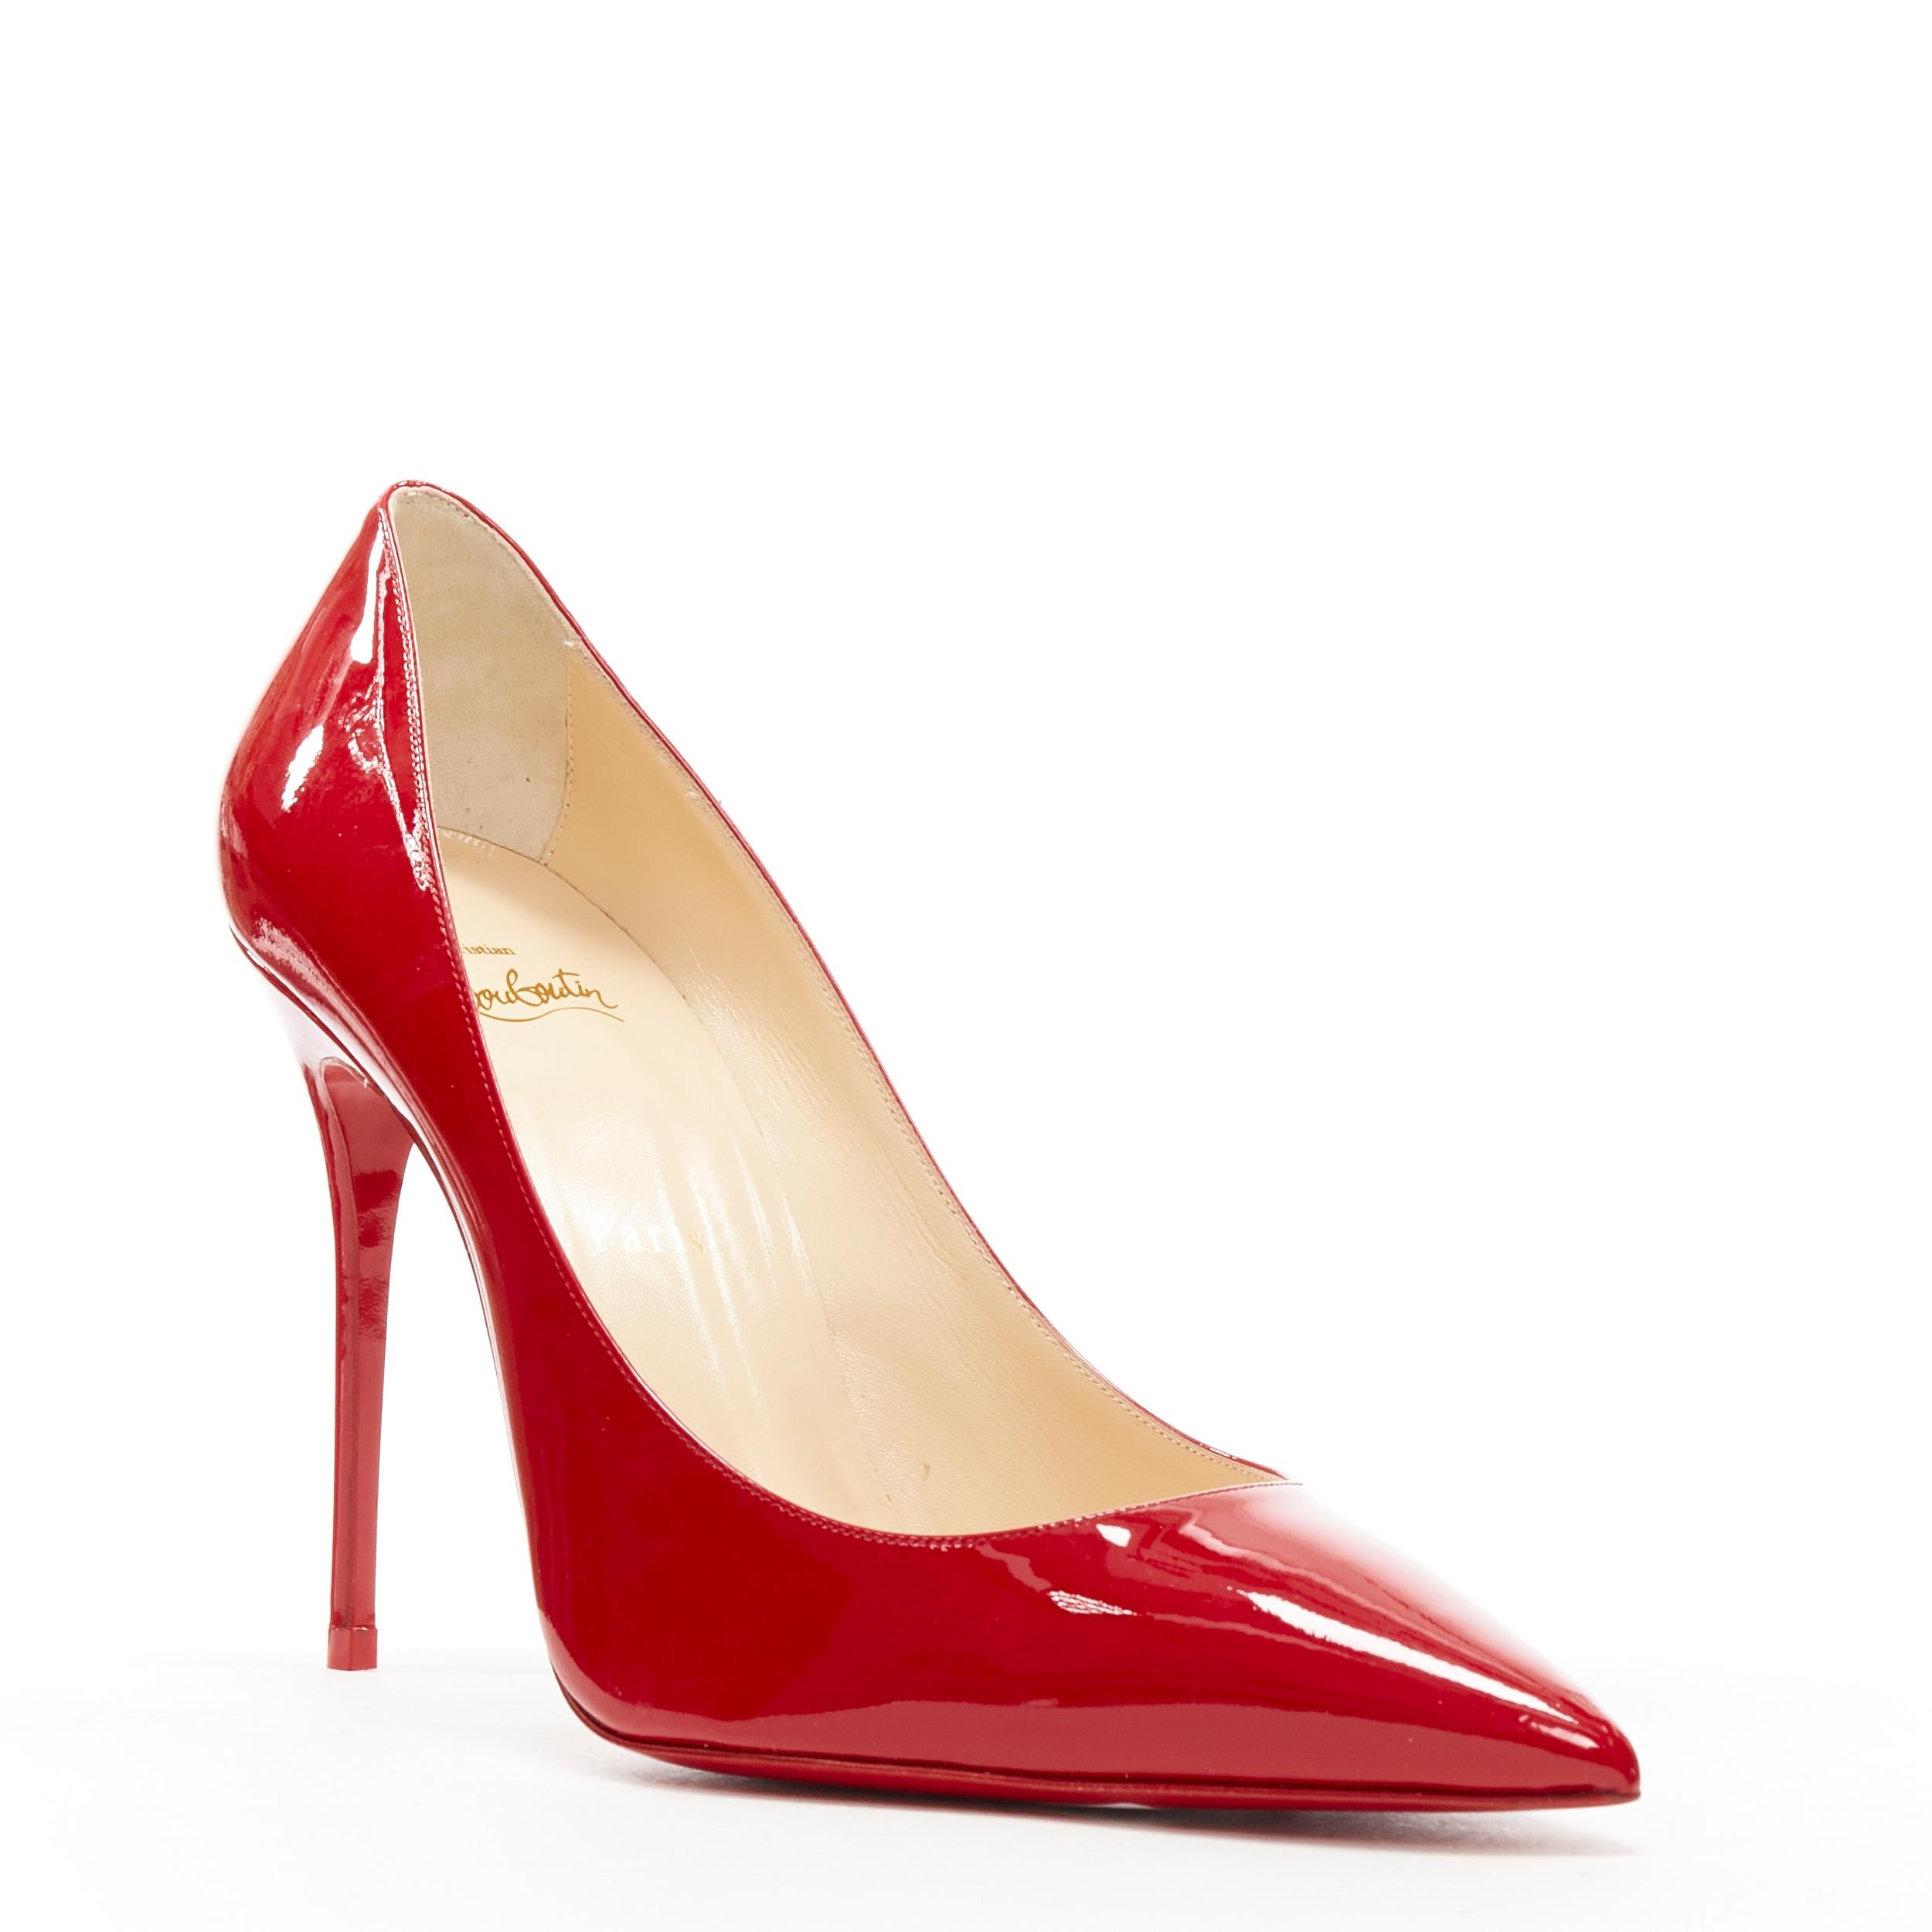 new CHRISTIAN LOUBOUTIN Kate 100 R251 Loubi red patent stiletto pump EU40.5
Brand: Christian Louboutin
Designer: Christian Louboutin
Model Name / Style: Kate 100
Material: Patent leather
Color: Red
Pattern: Solid
Extra Detail: Style code: 3120836